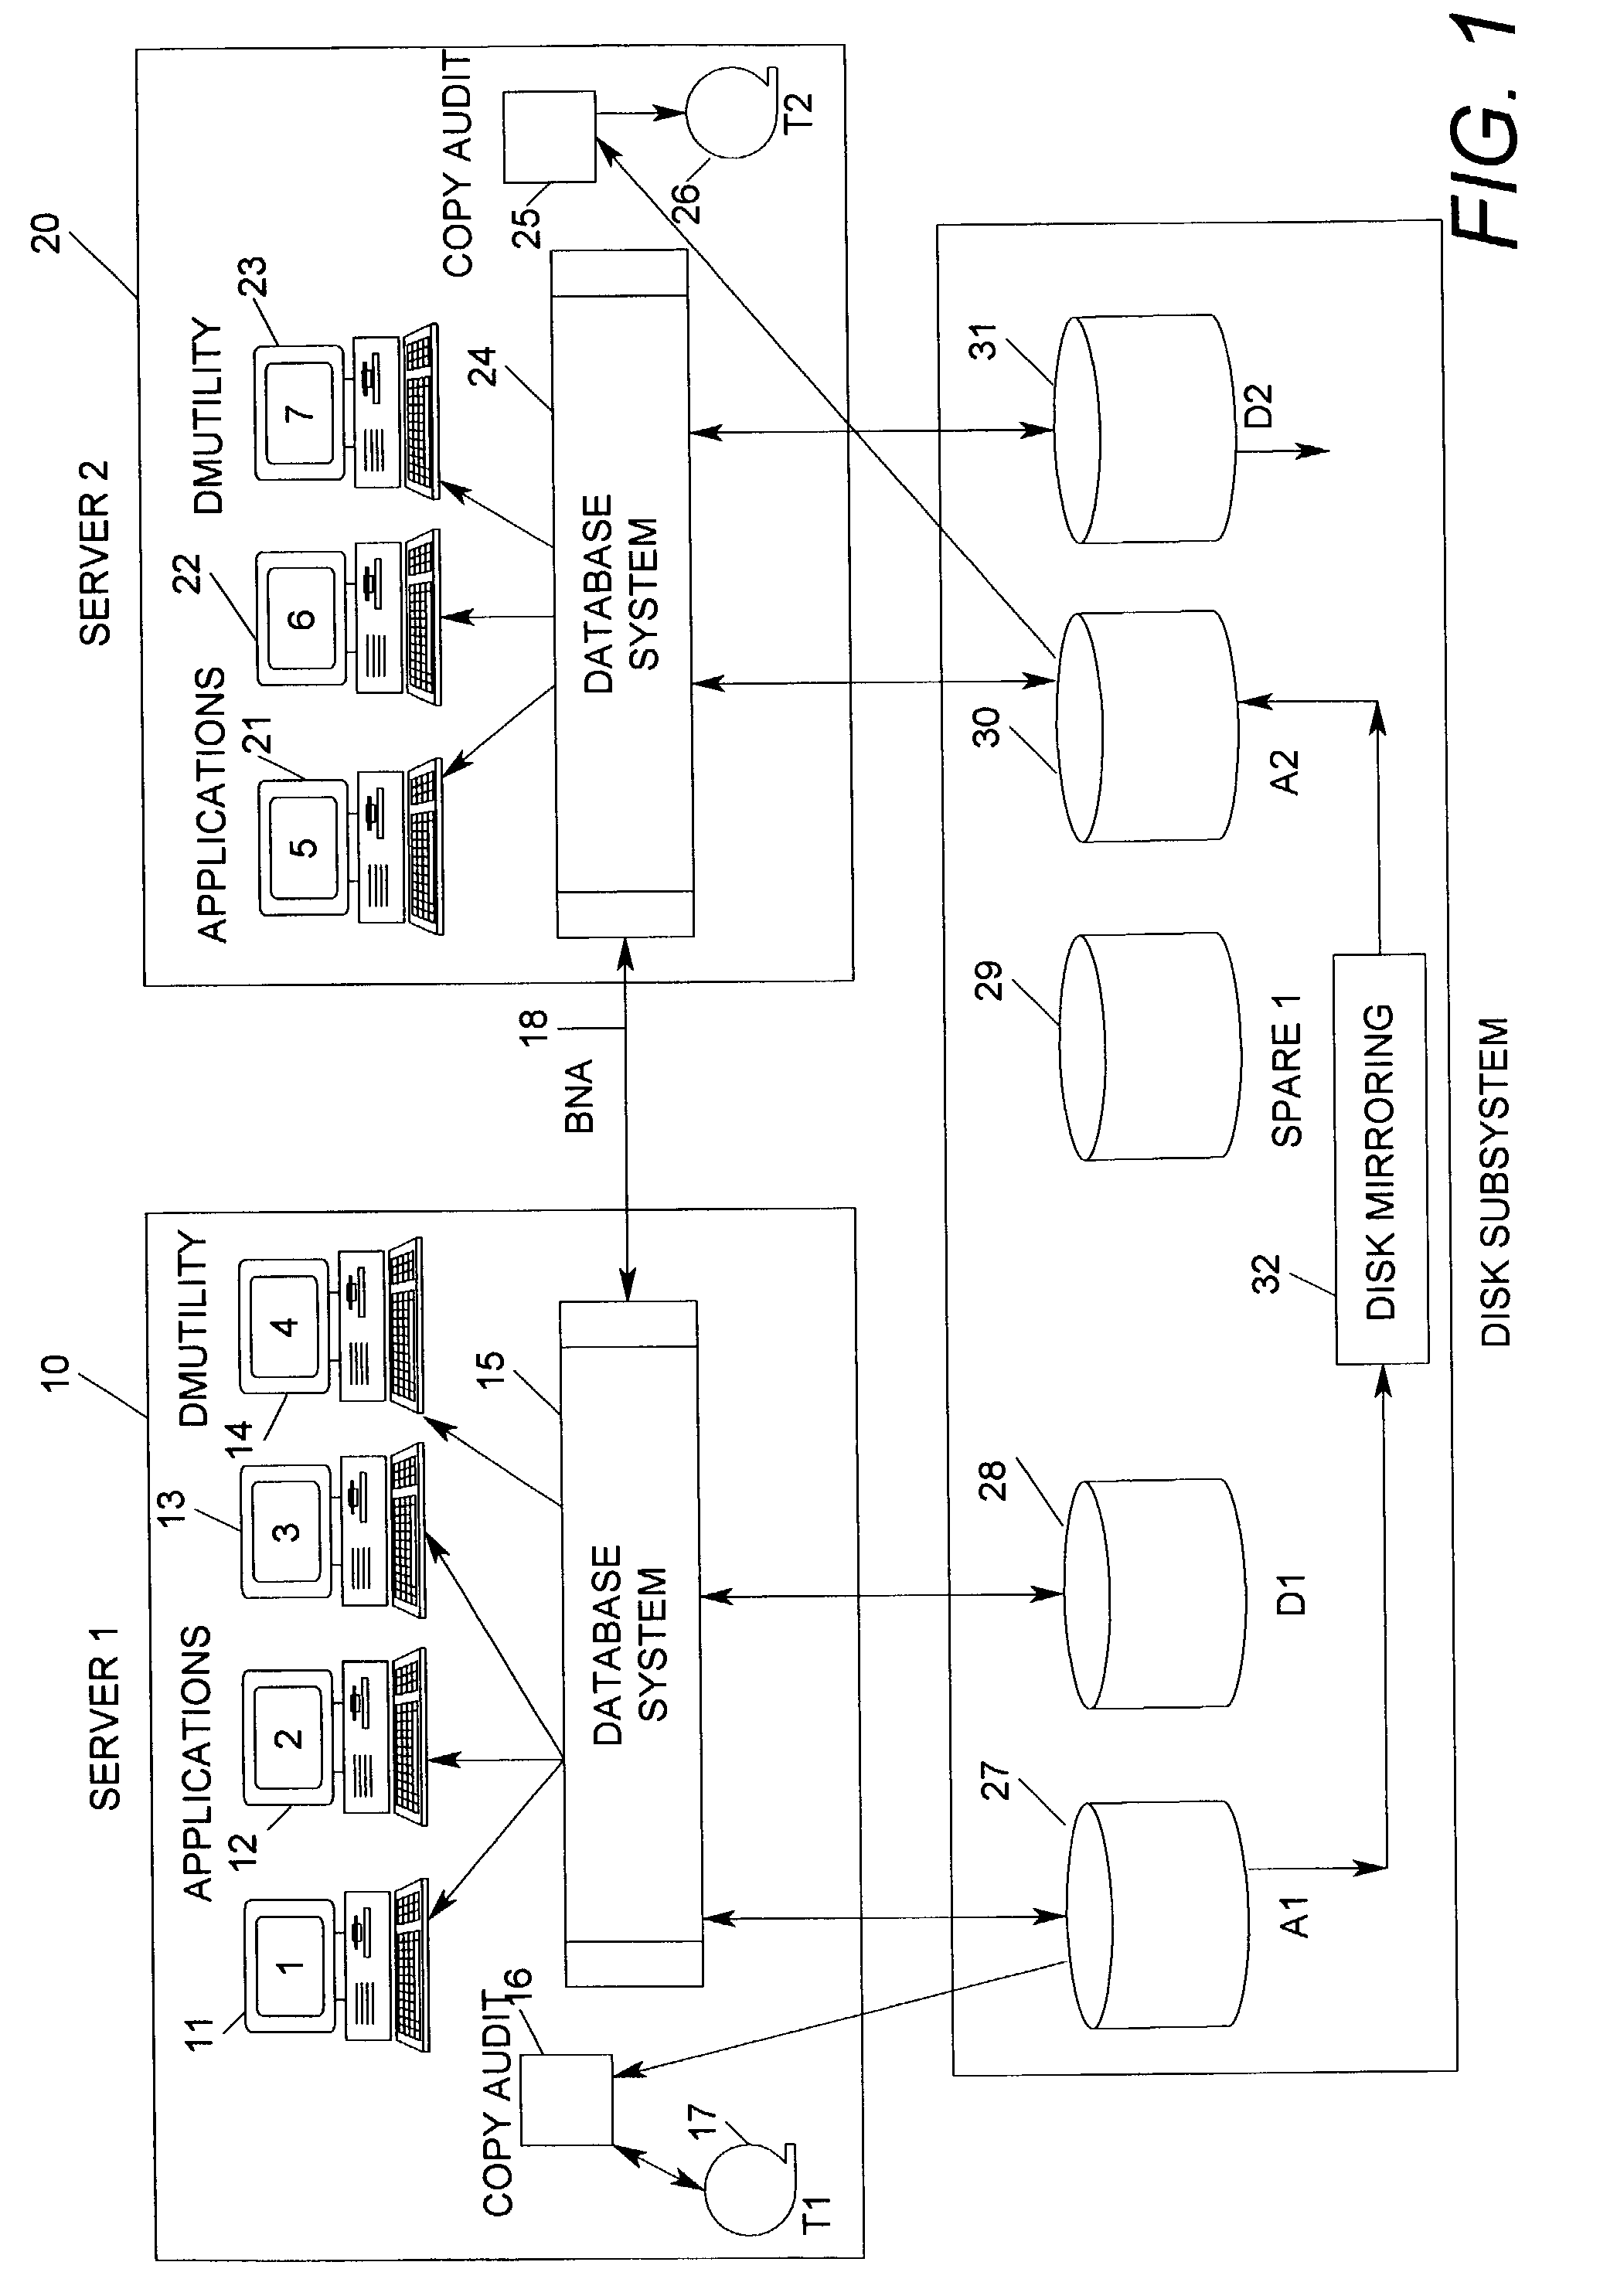 System and method for automatic audit data archiving within a remote database backup system